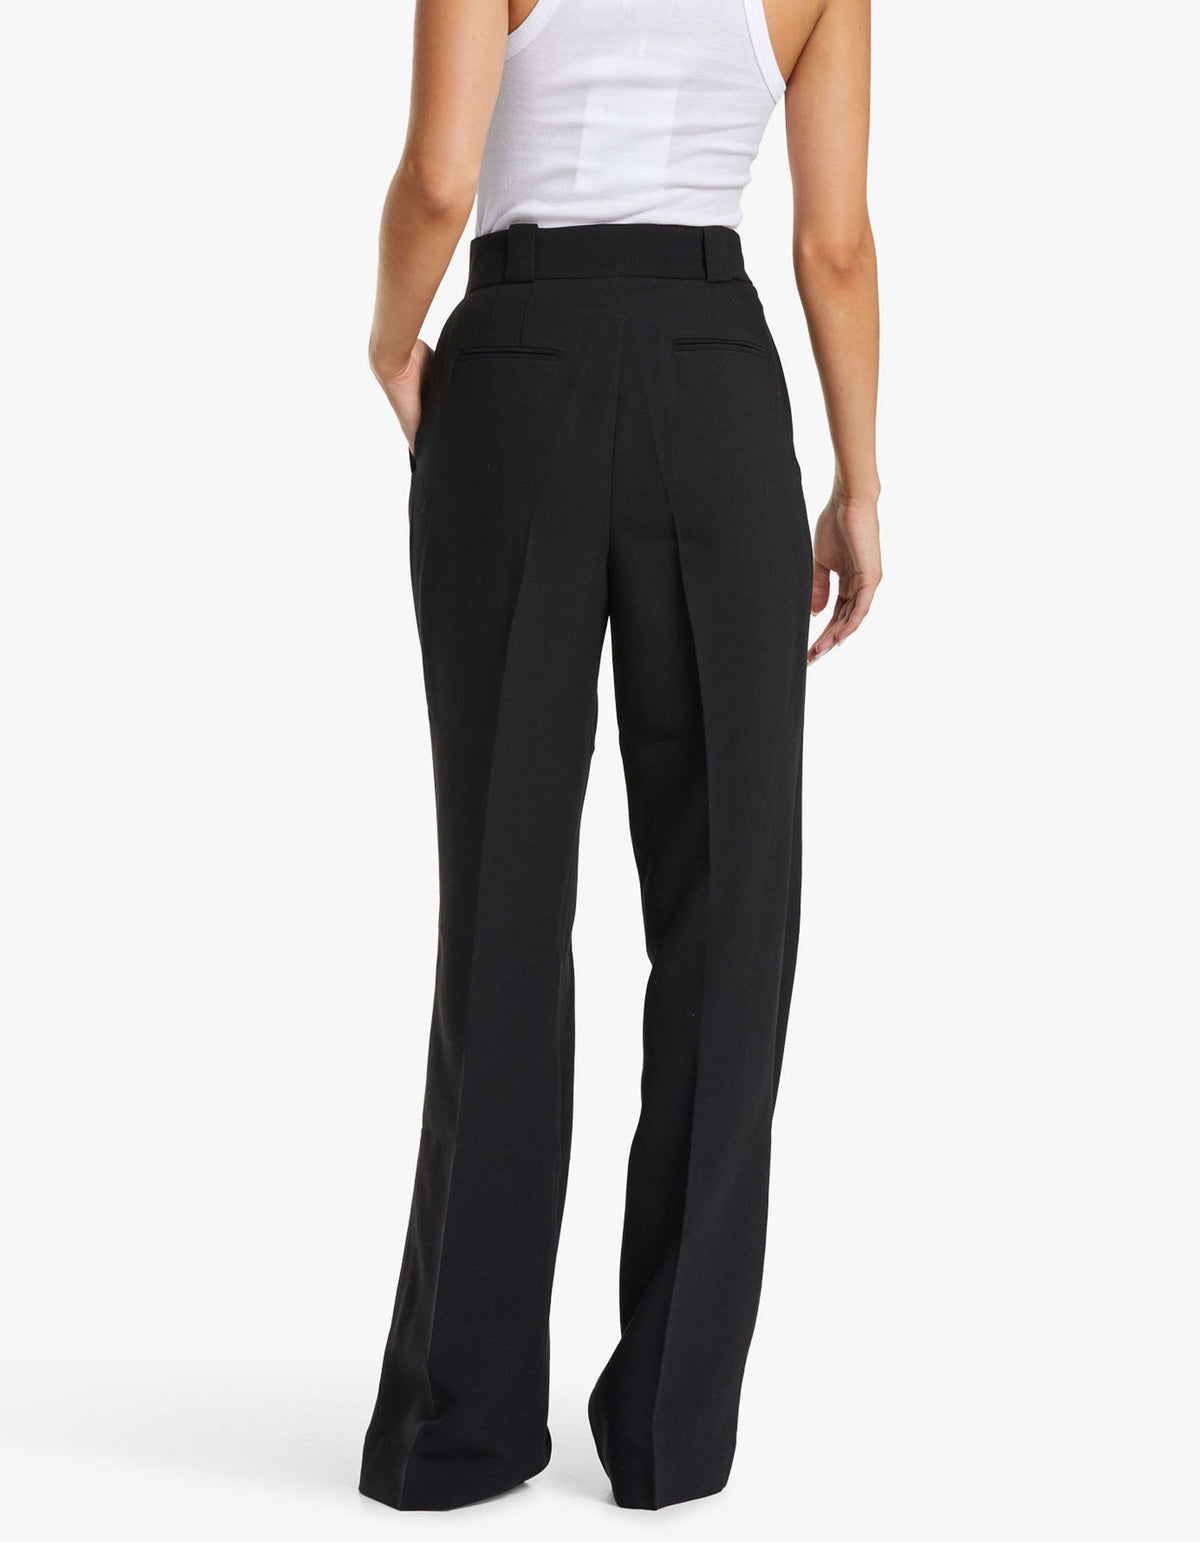 Tailored High Waist Black Flared Trousers | Zoven – motelrocks.com